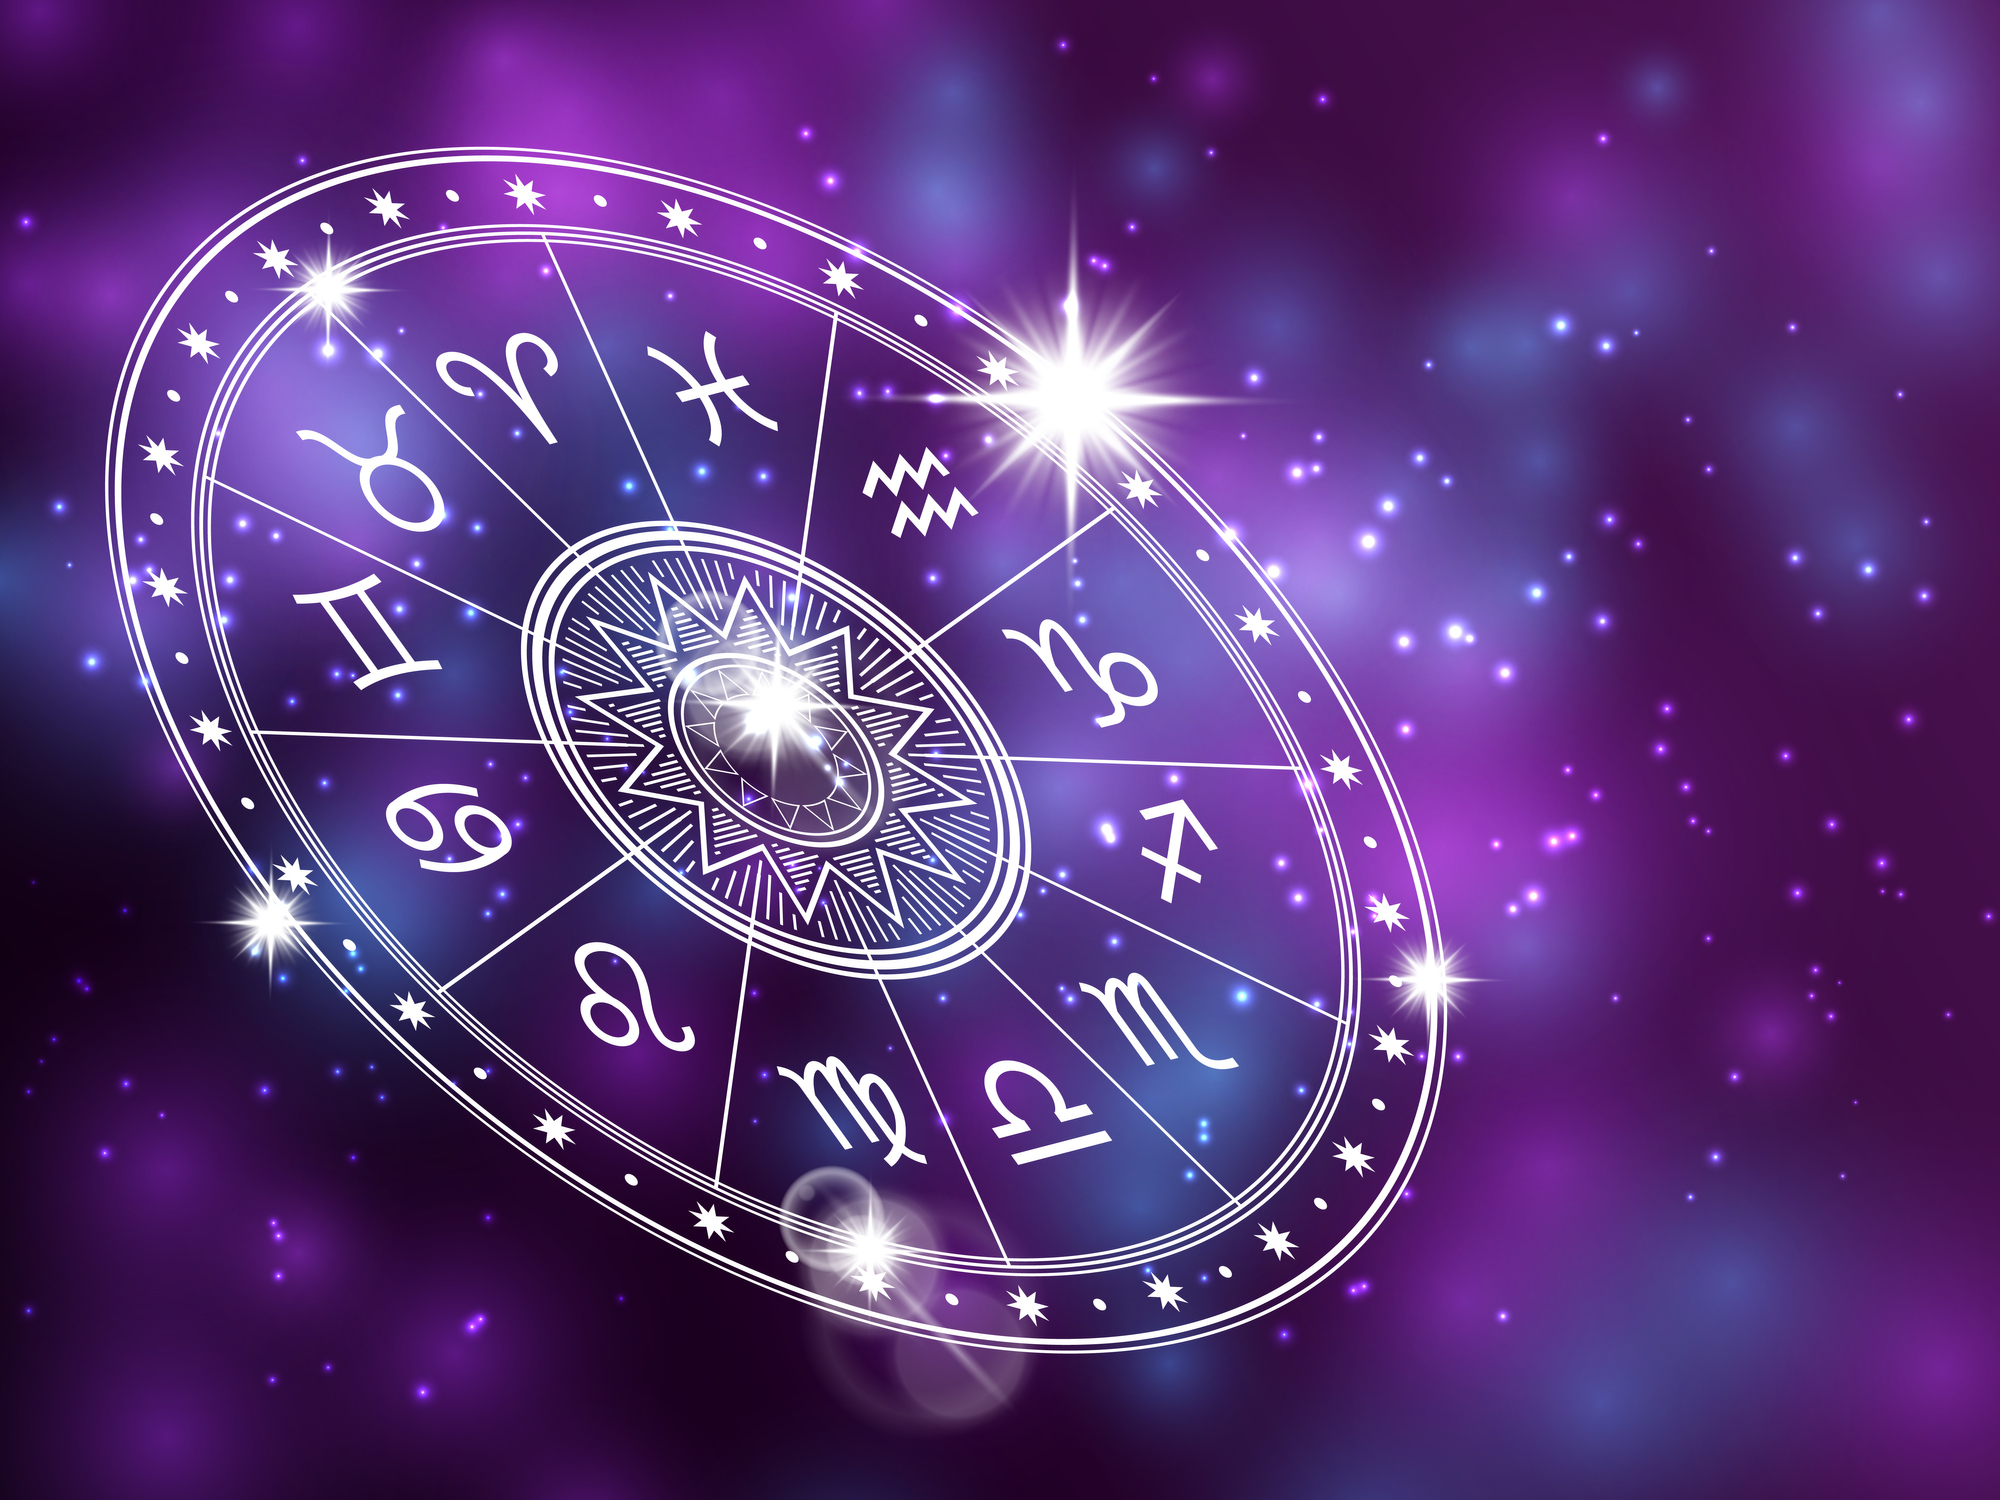 What are the zodiac stars?